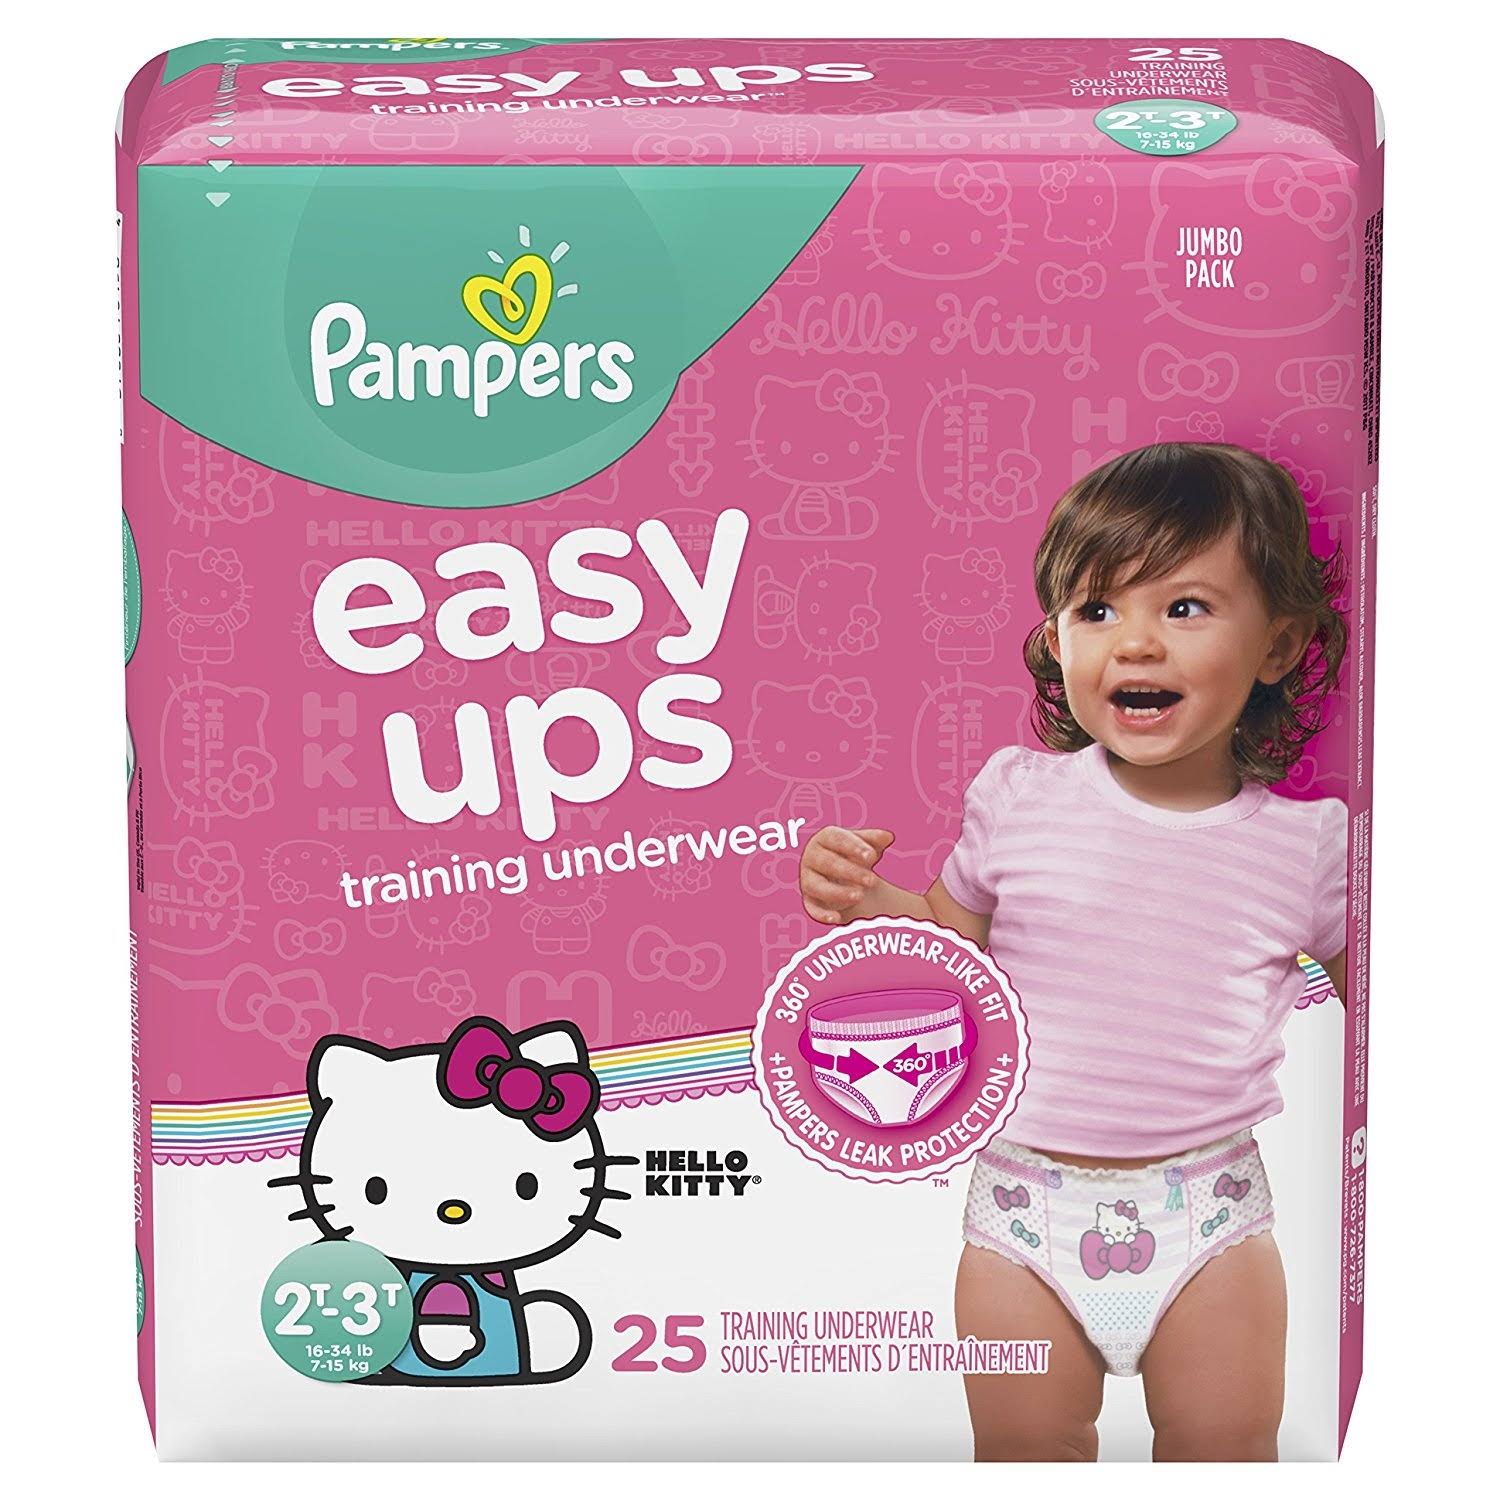 Pampers Easy Ups Hello Kitty Training Underwear - Size 2T-3T, 25ct